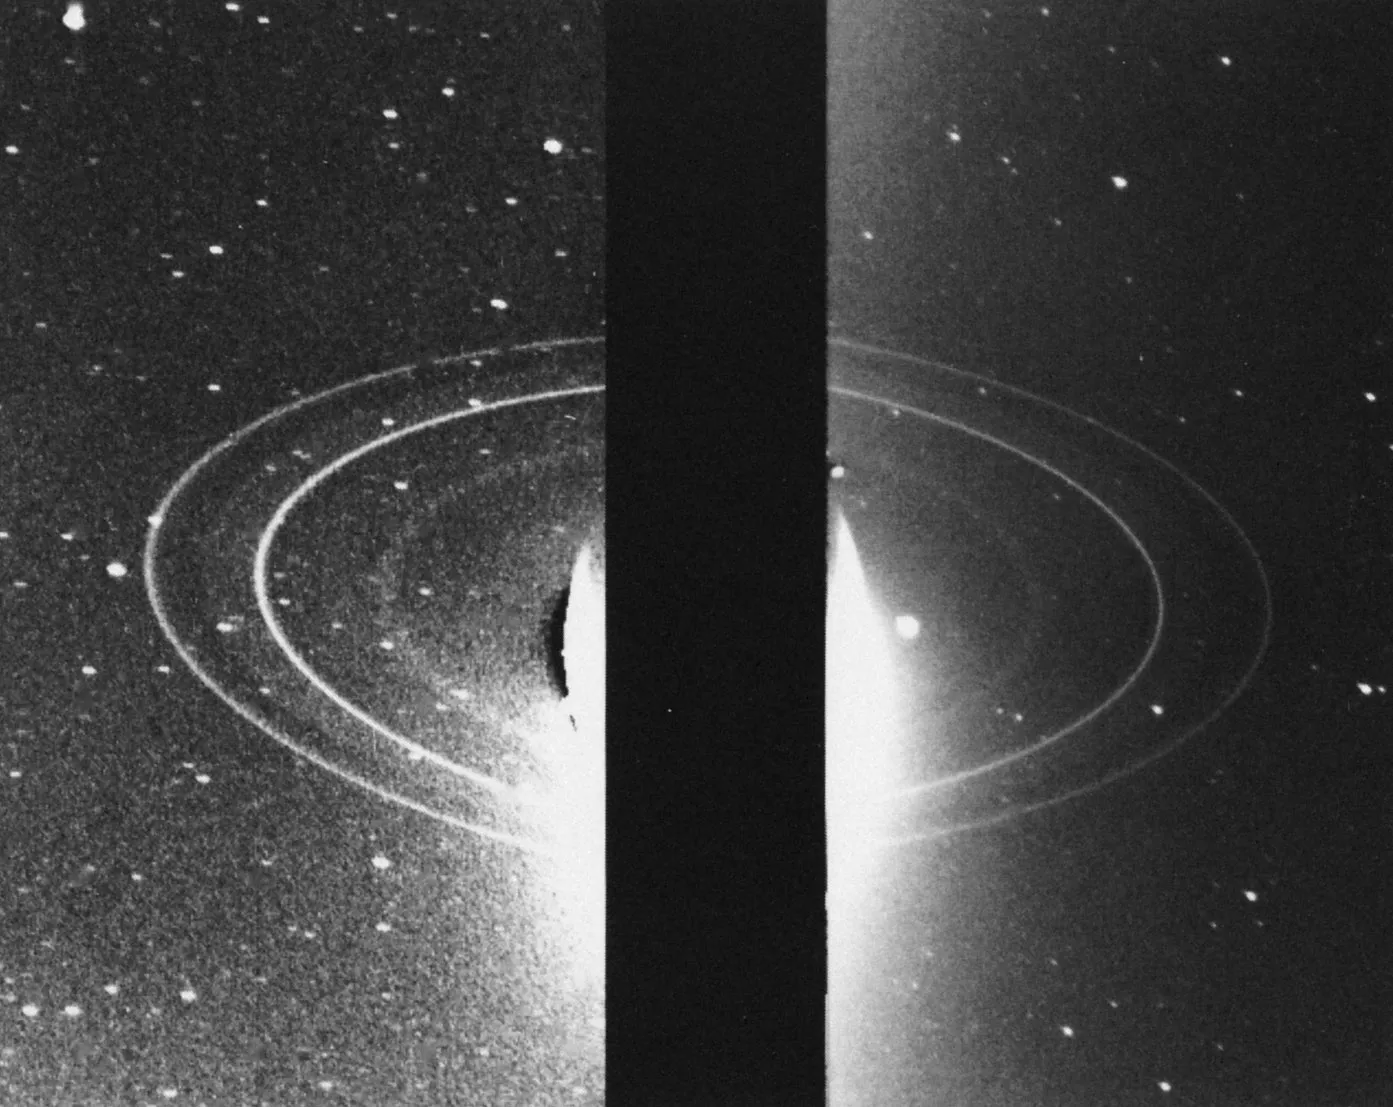 Neptune's ring system, as seen by Voyager 2 in August 1989